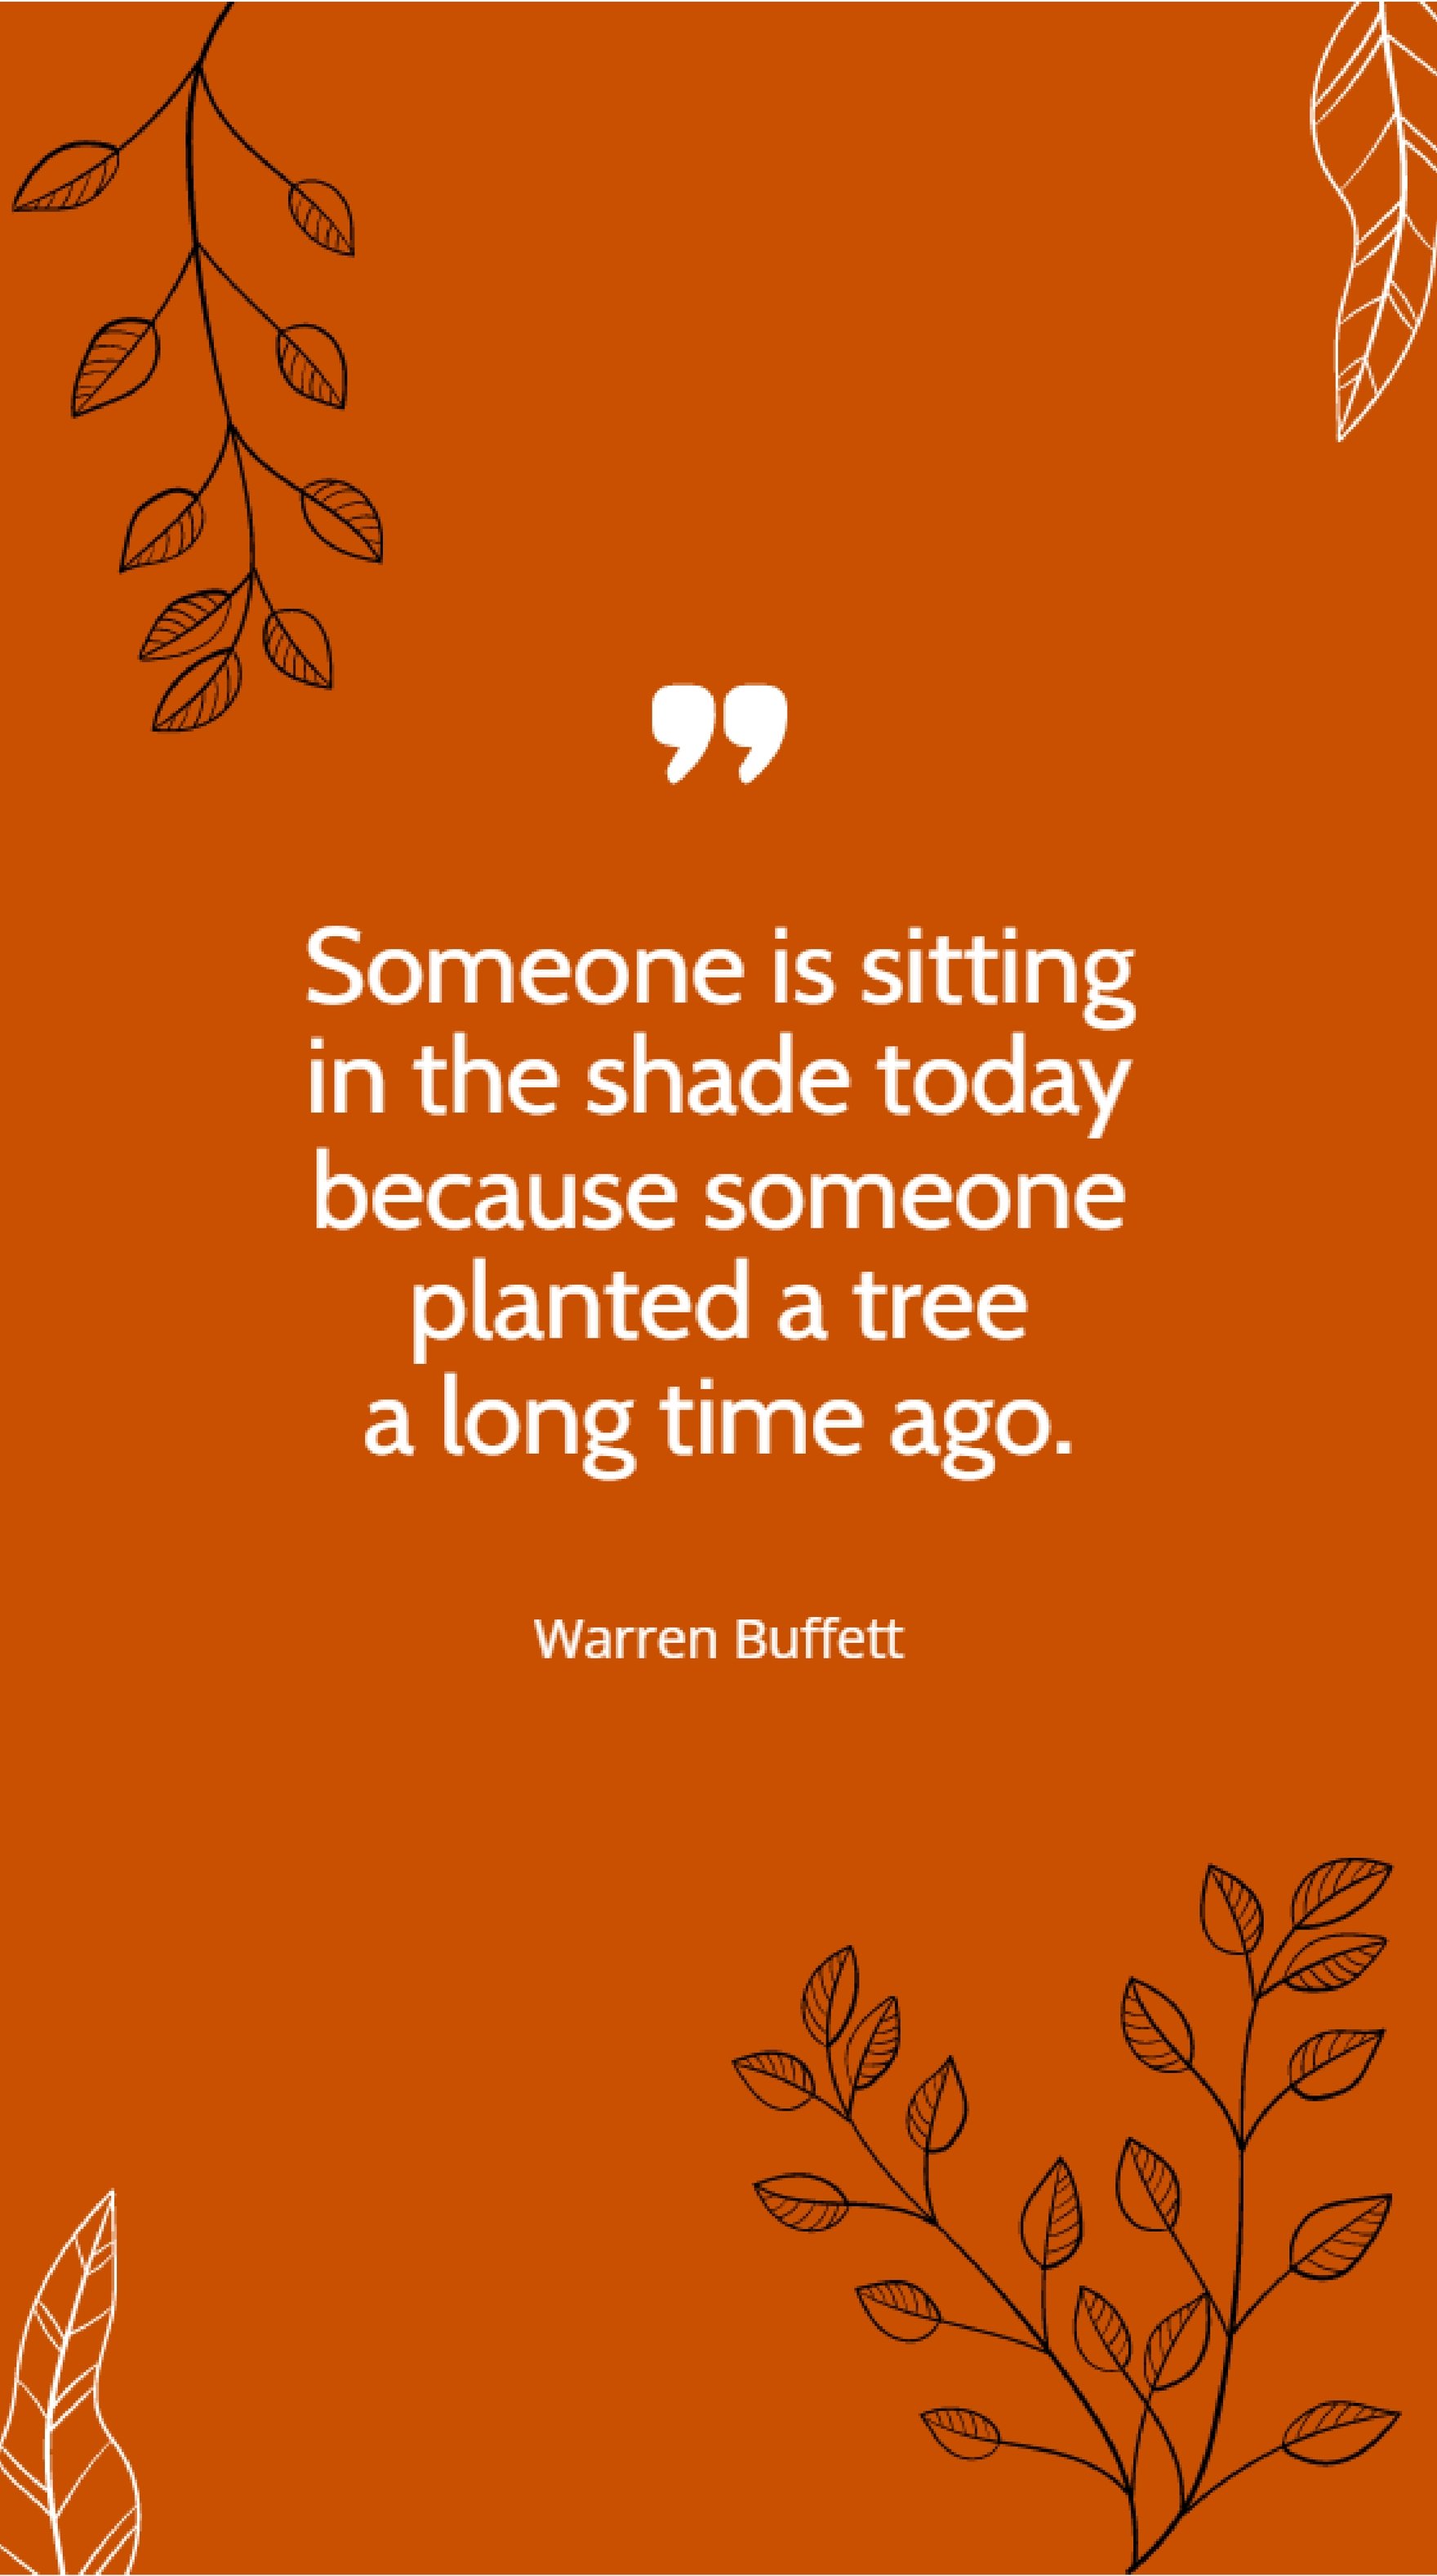 Warren Buffett - Someone is sitting in the shade today because someone planted a tree a long time ago